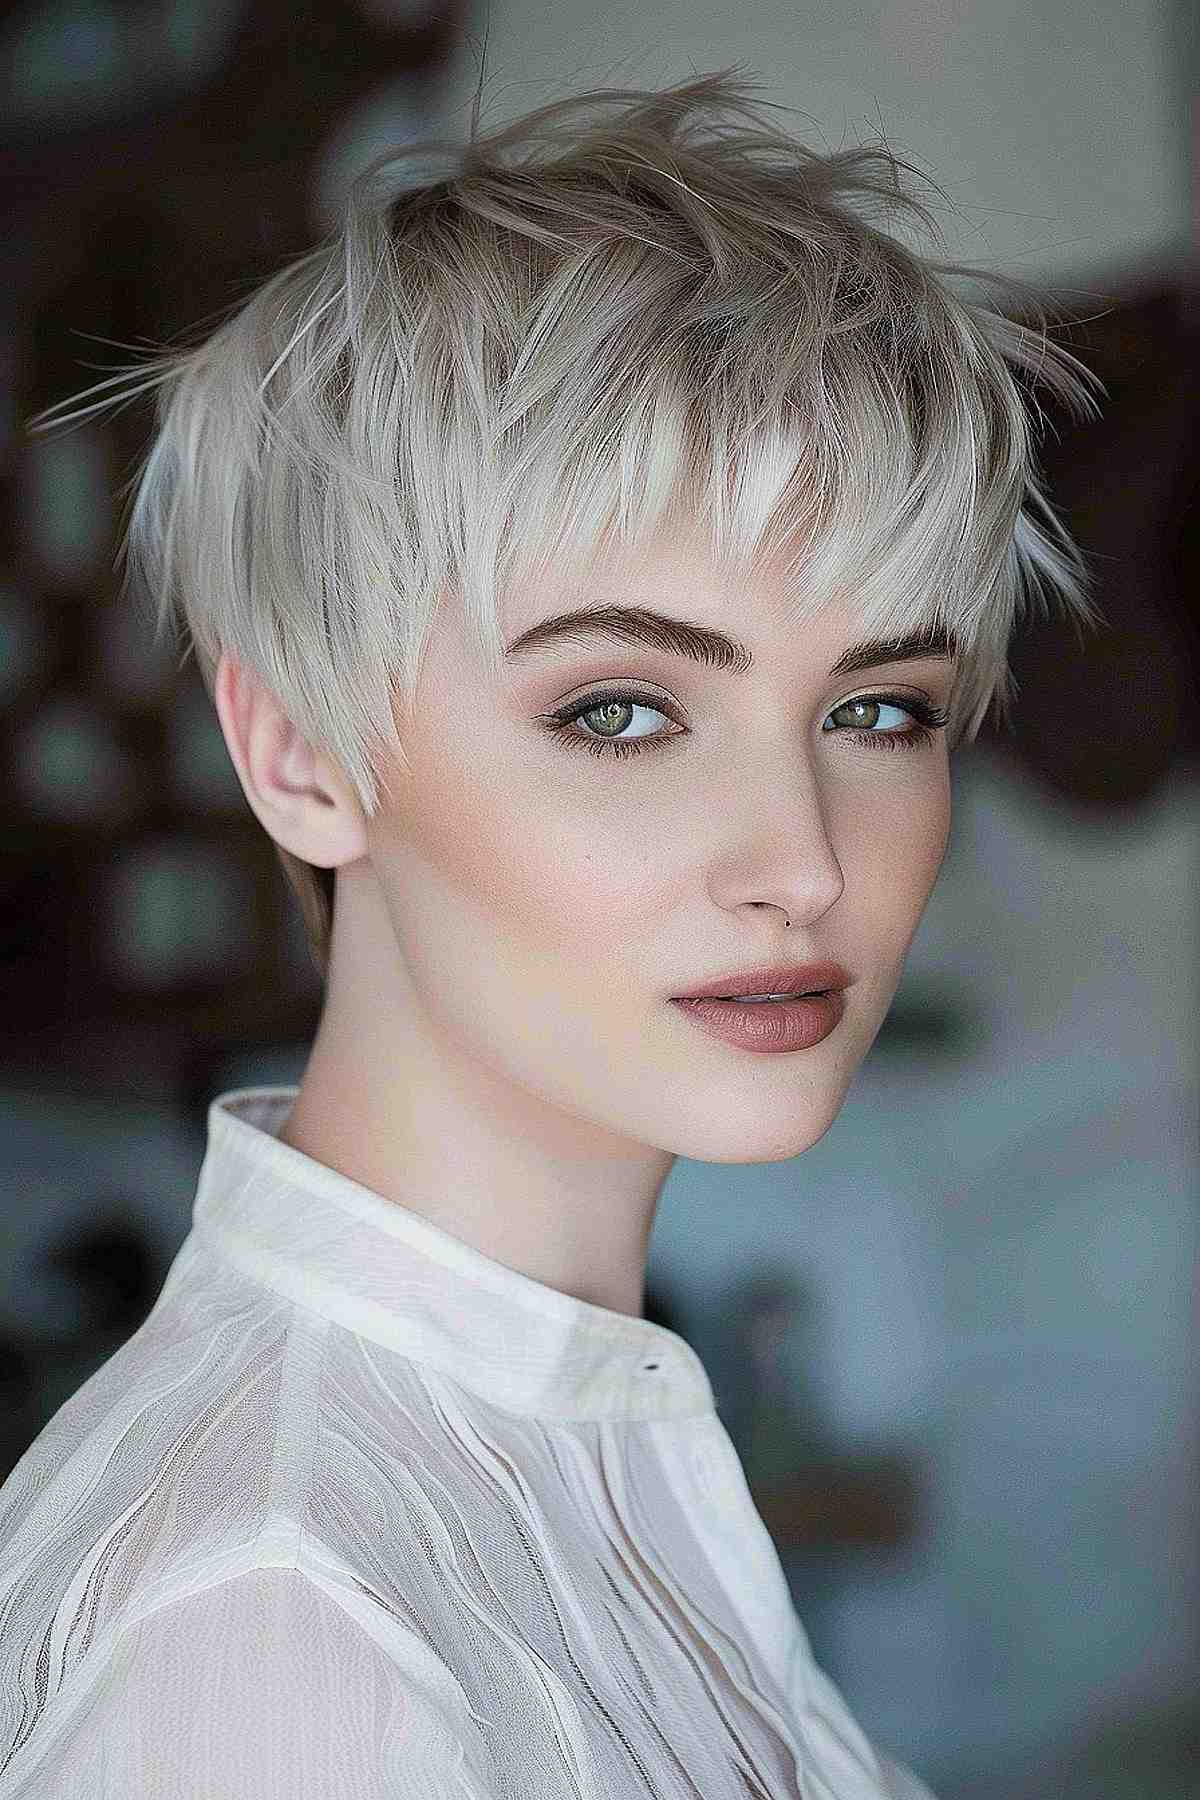 Choppy elf haircut with pixie edge in platinum blonde, featuring a textured, tousled look.